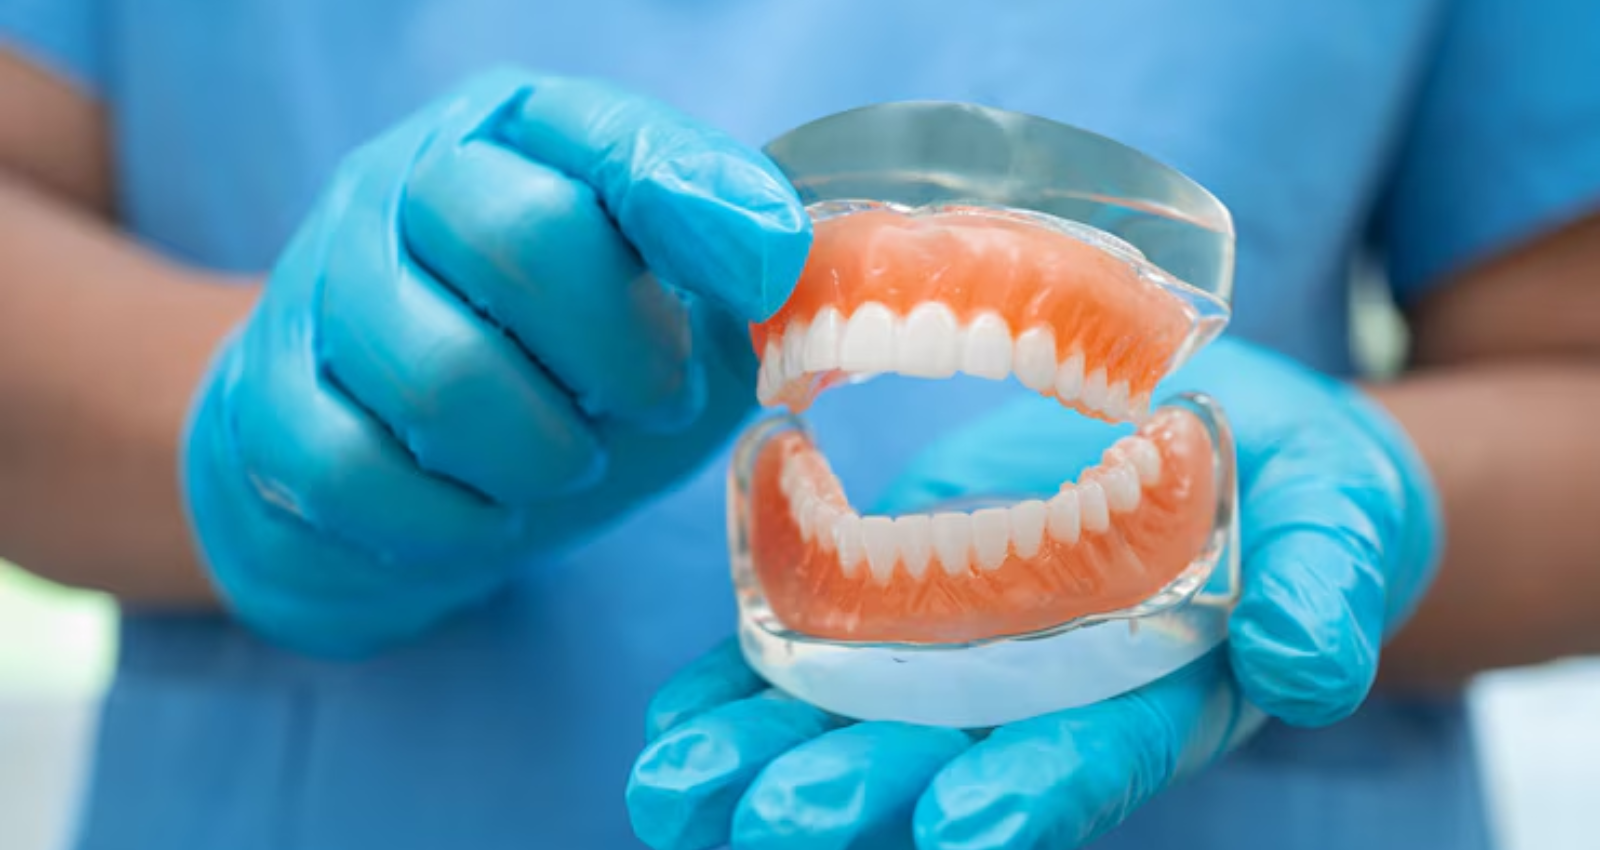 exercises for speaking with dentures